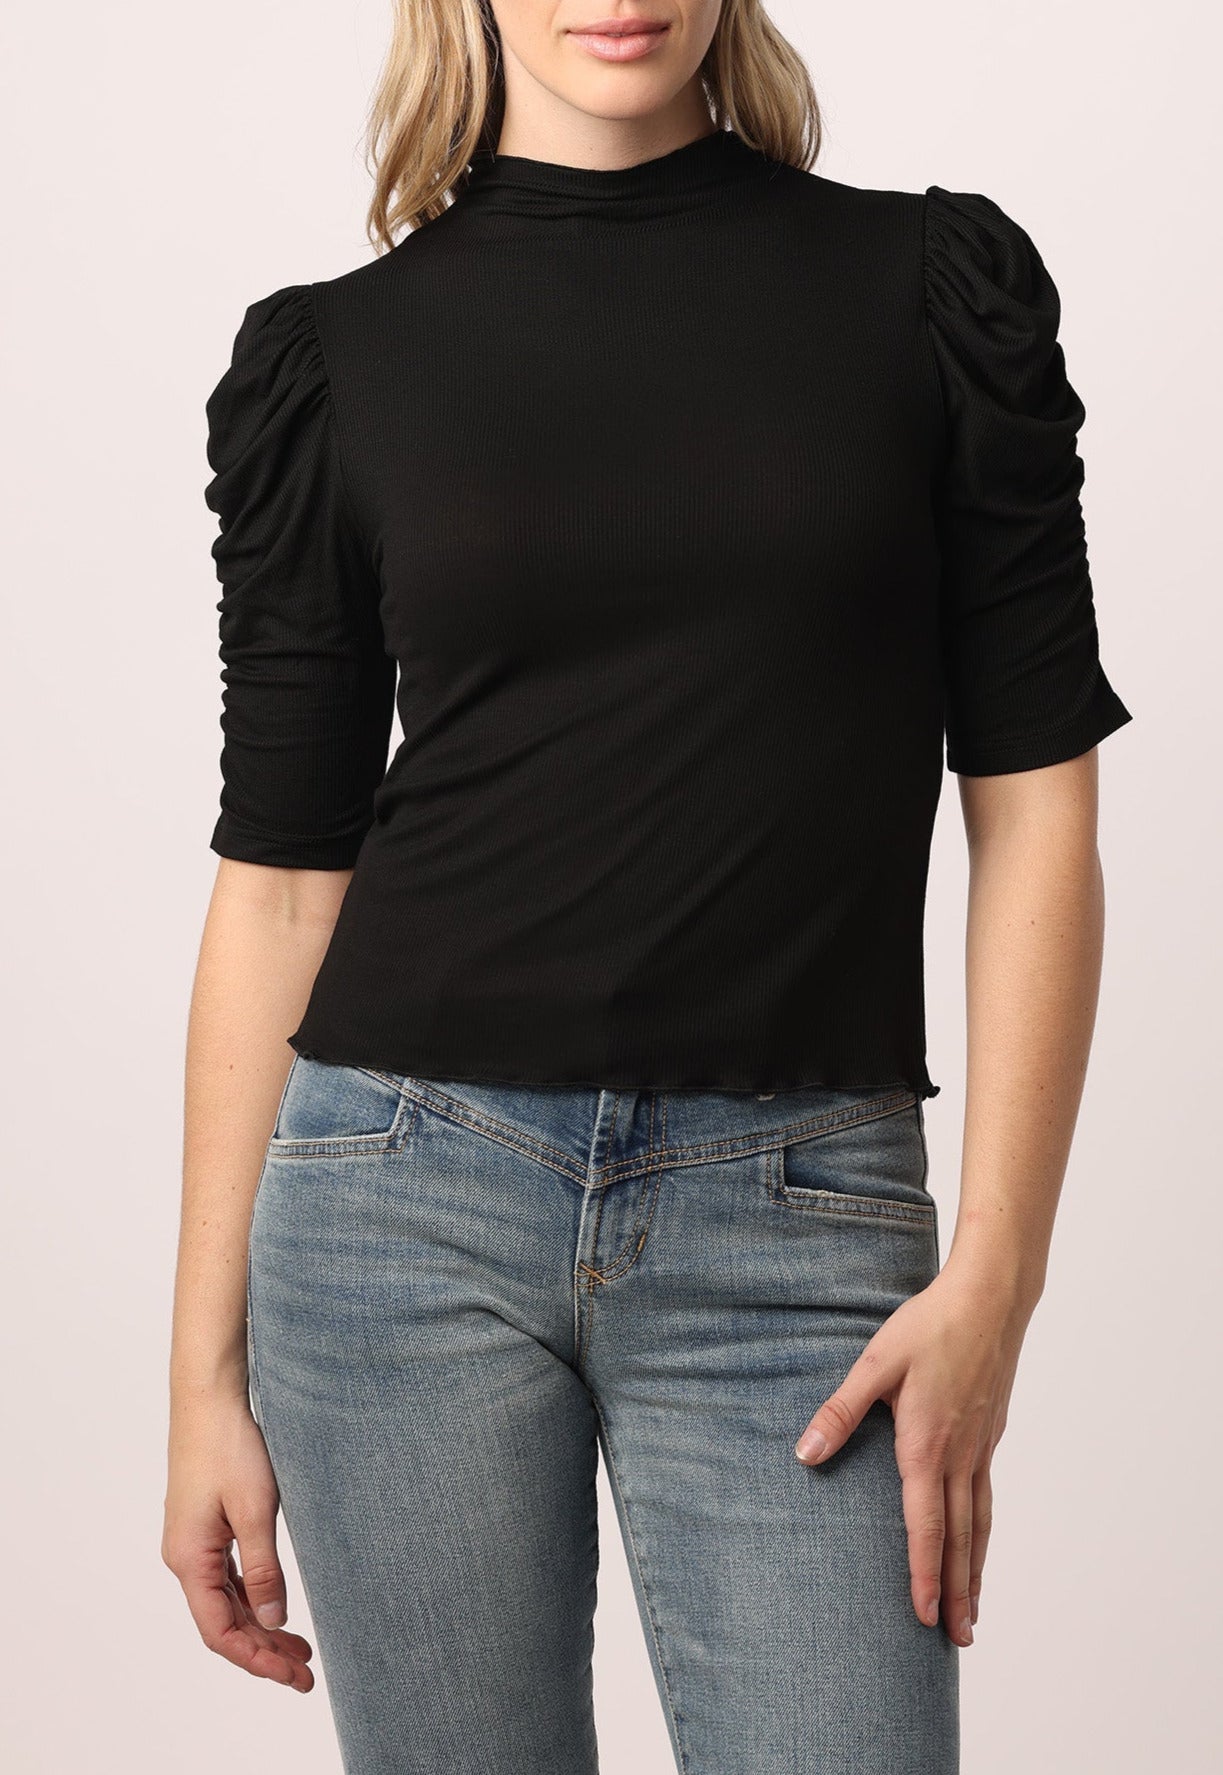 quinn-3/4-ruched-sleeve-top-black